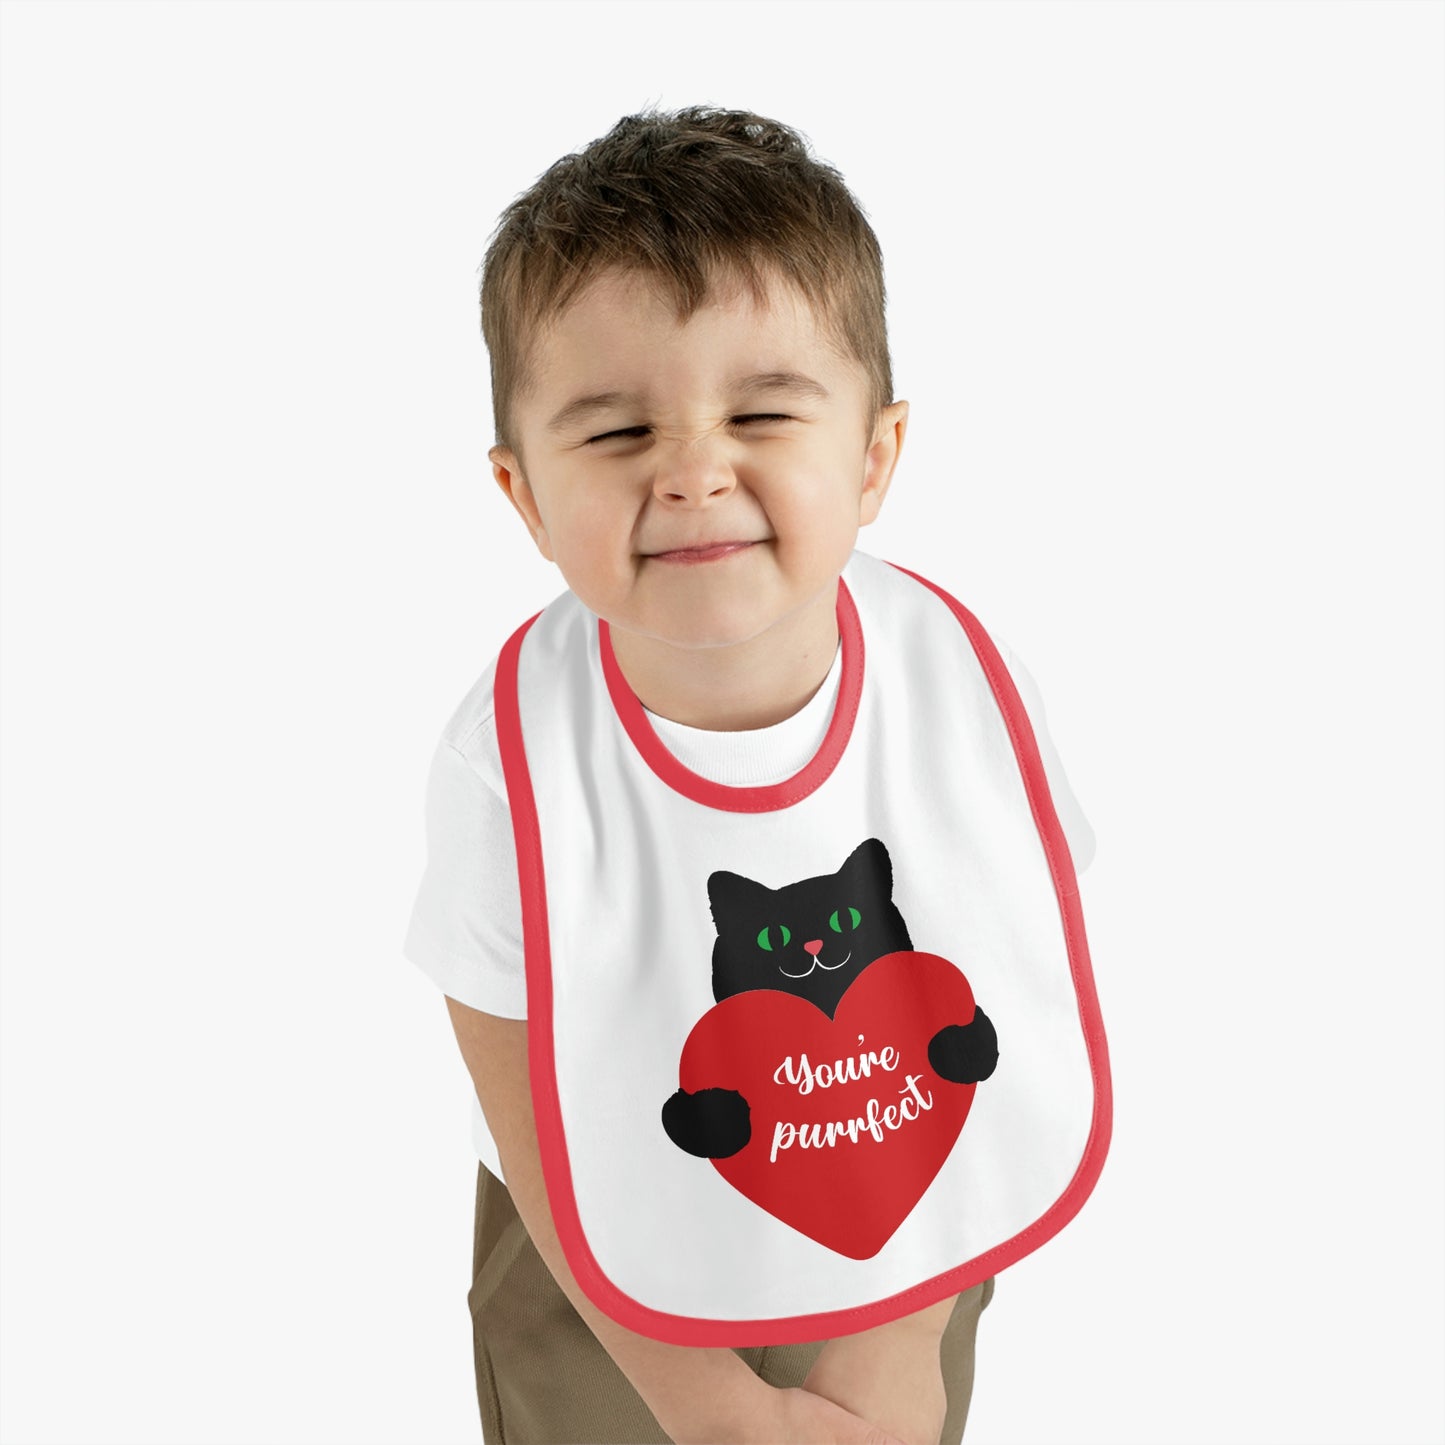 Mock up of a toddler 'making a face' while wearing our bib